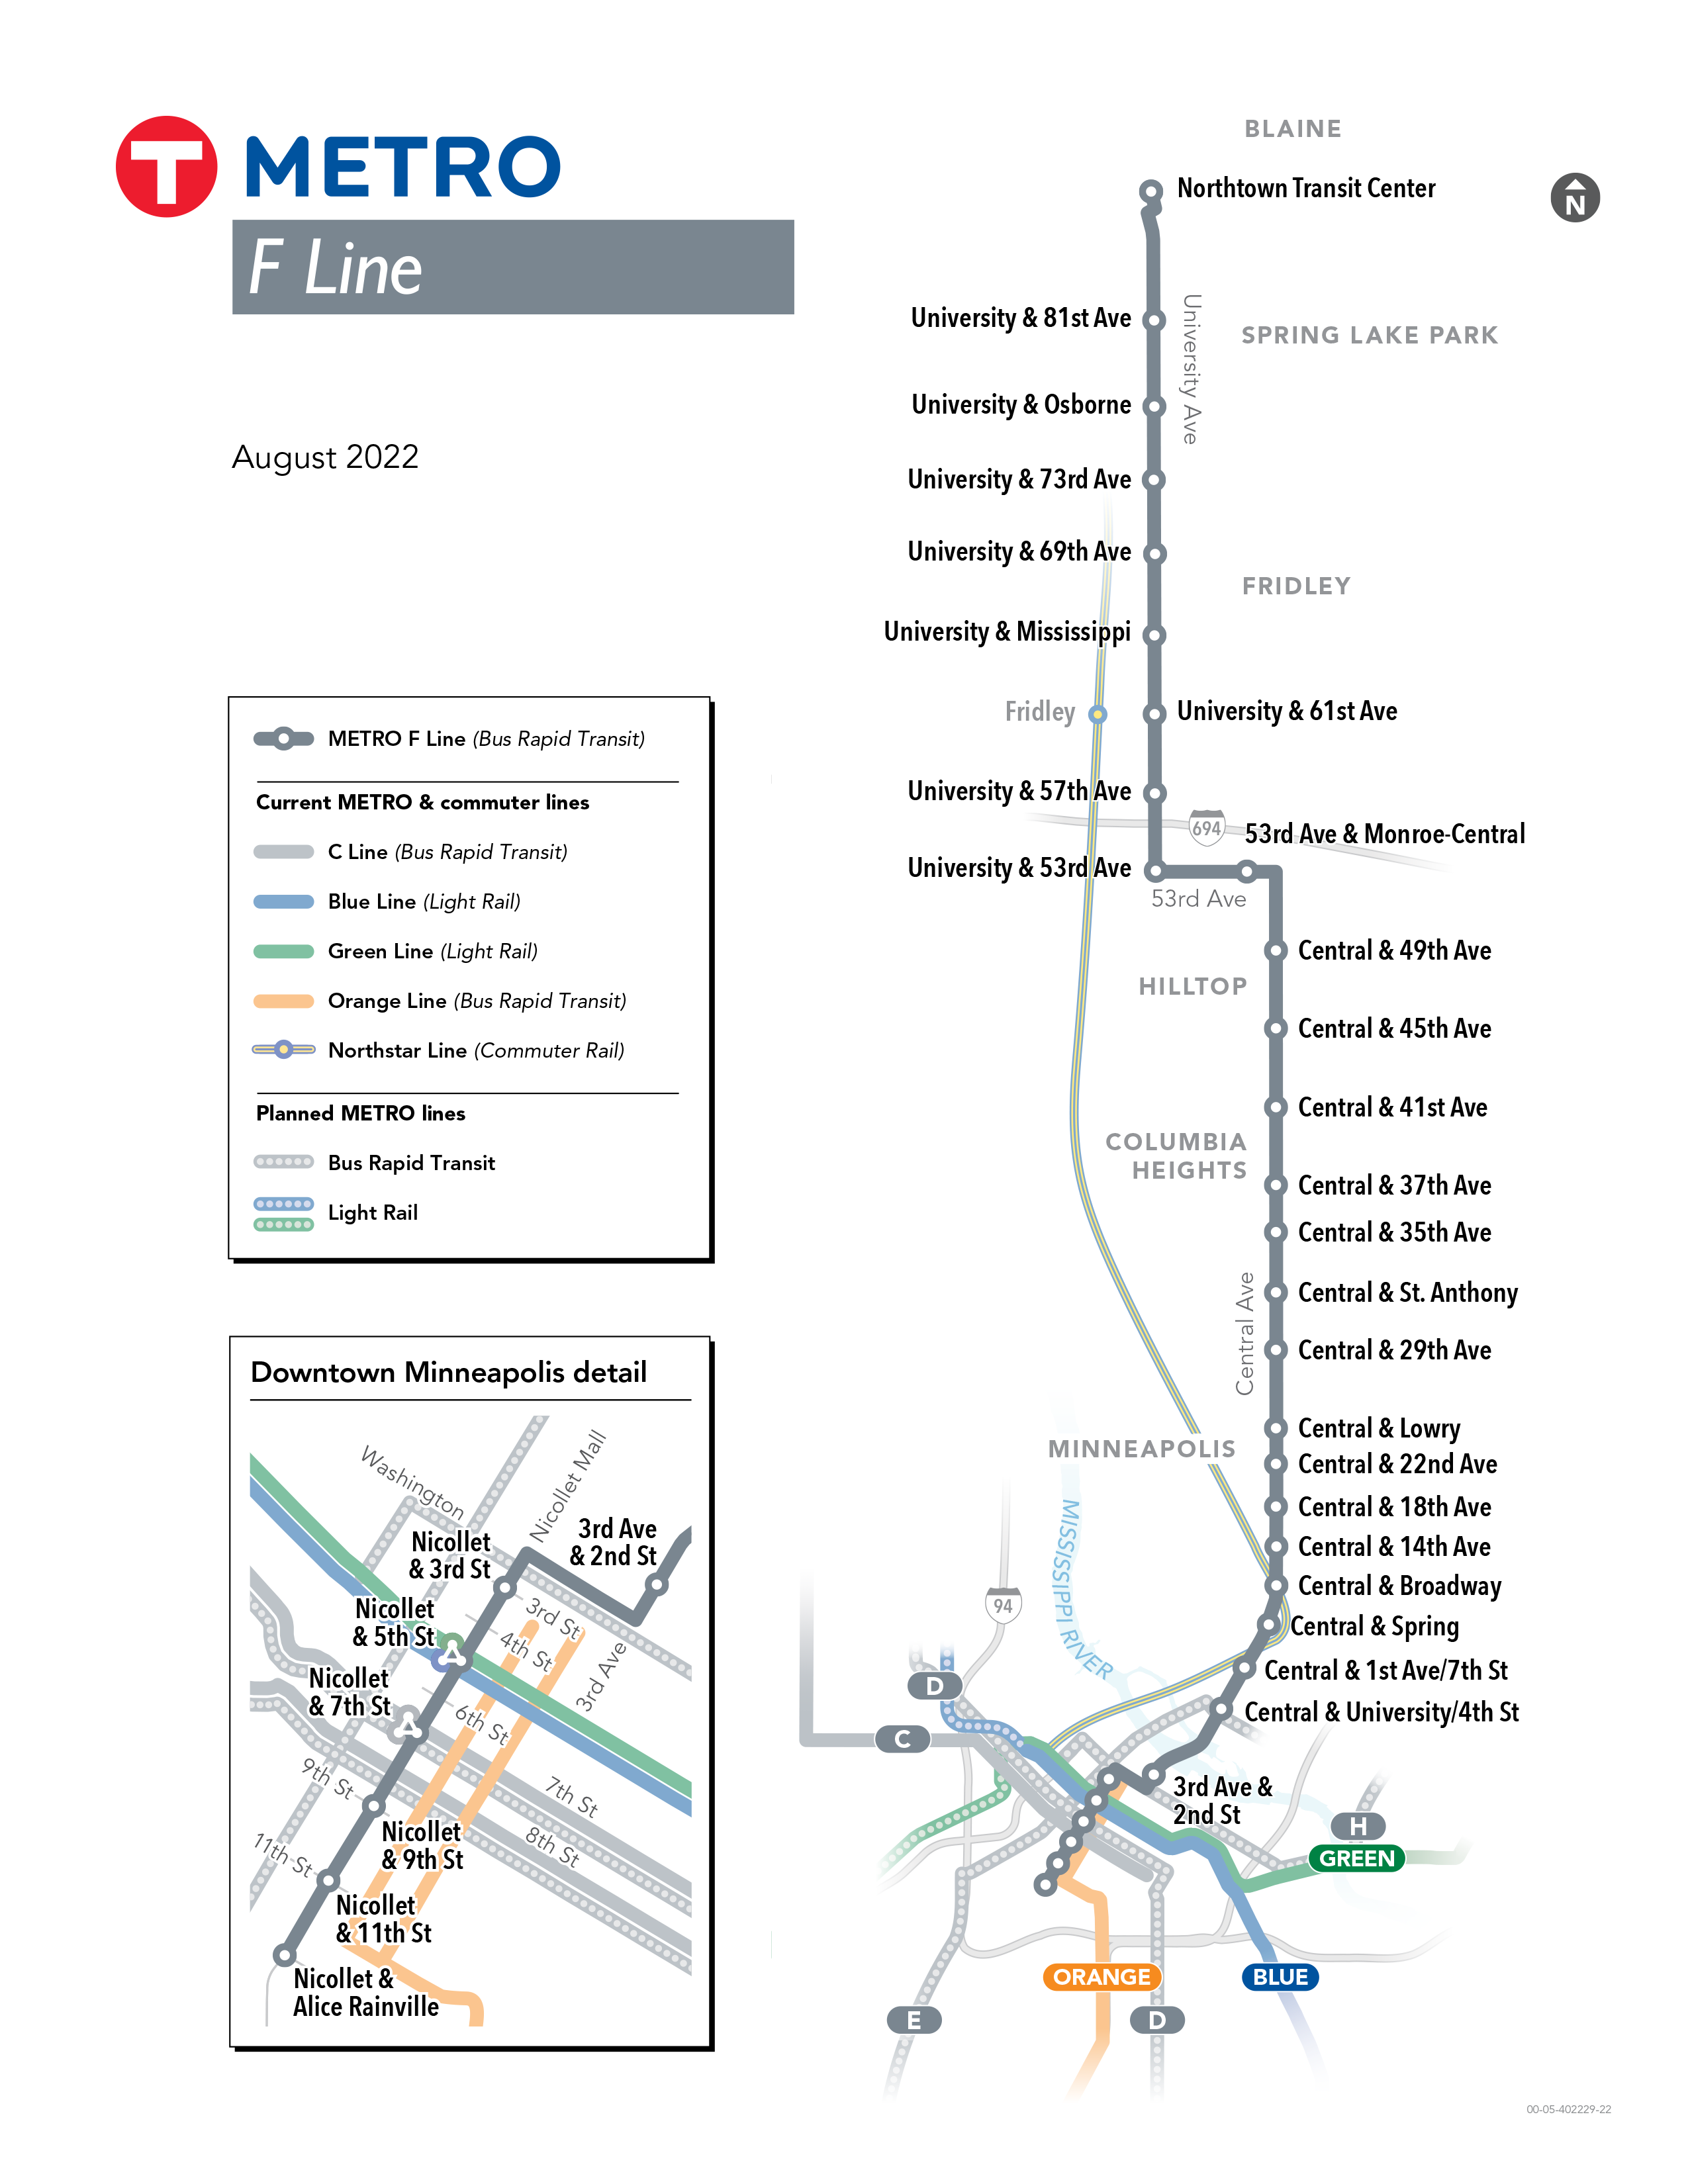 Map of the F Line with proposed station locations from August 2022